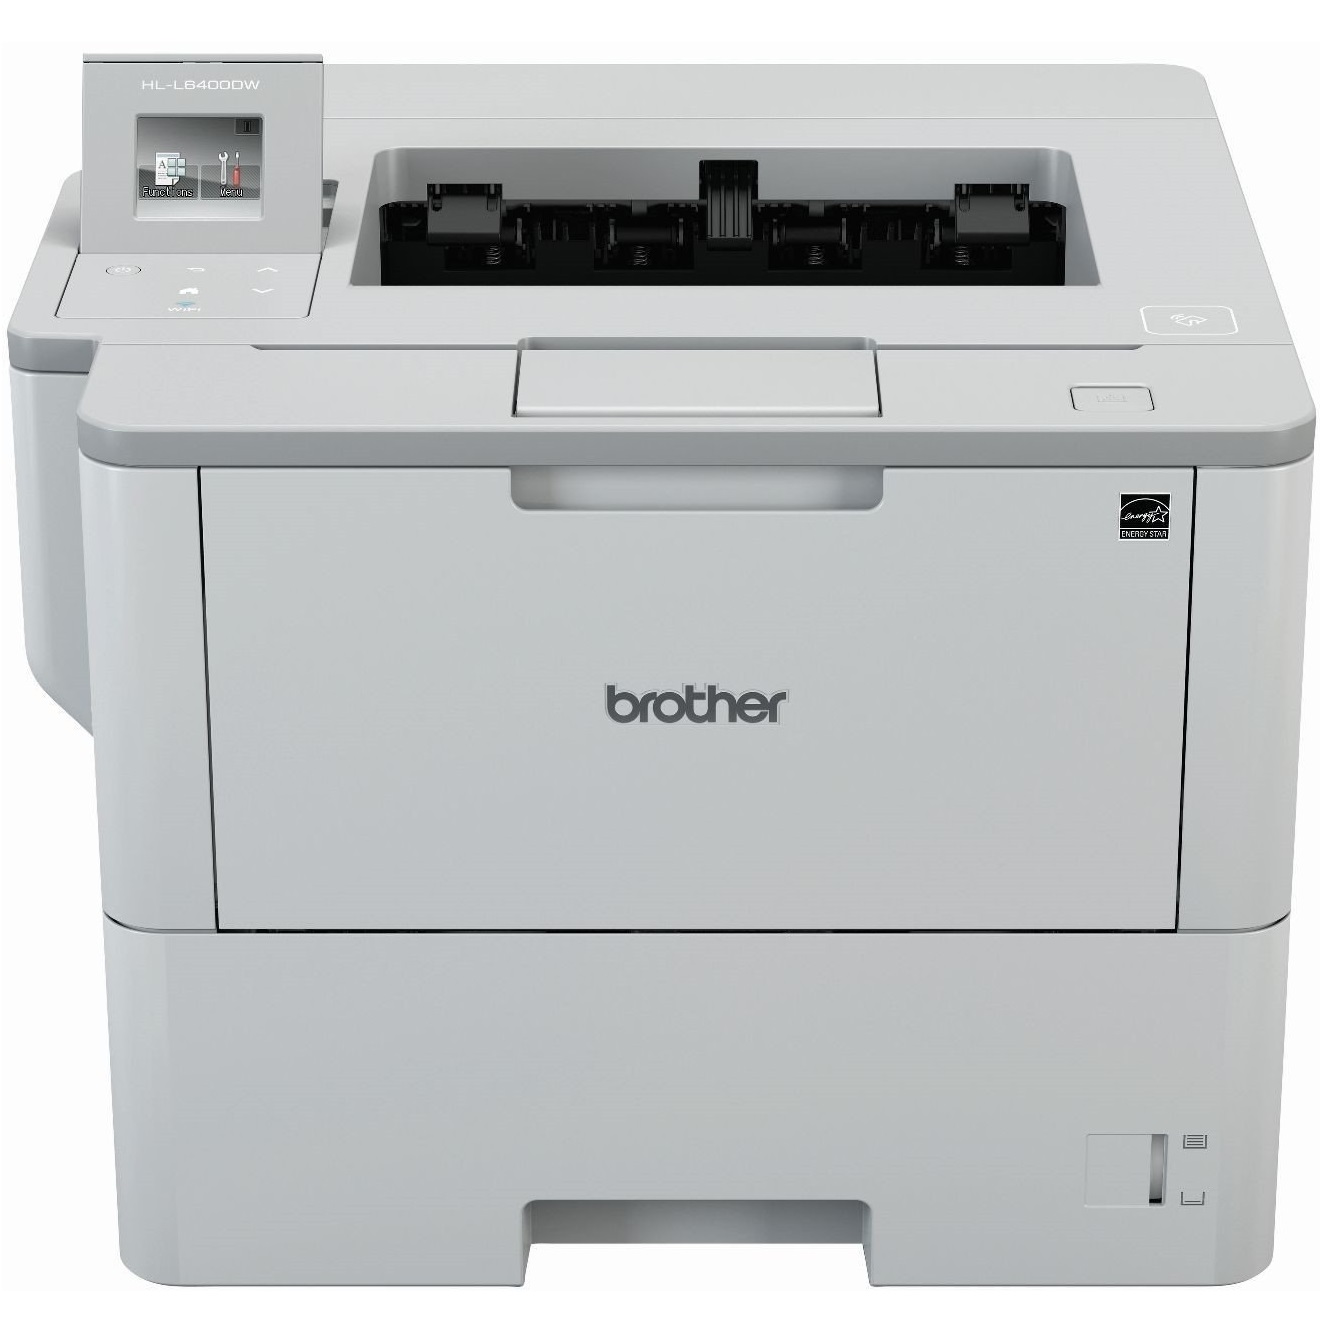 BROTHER HL-6400DW